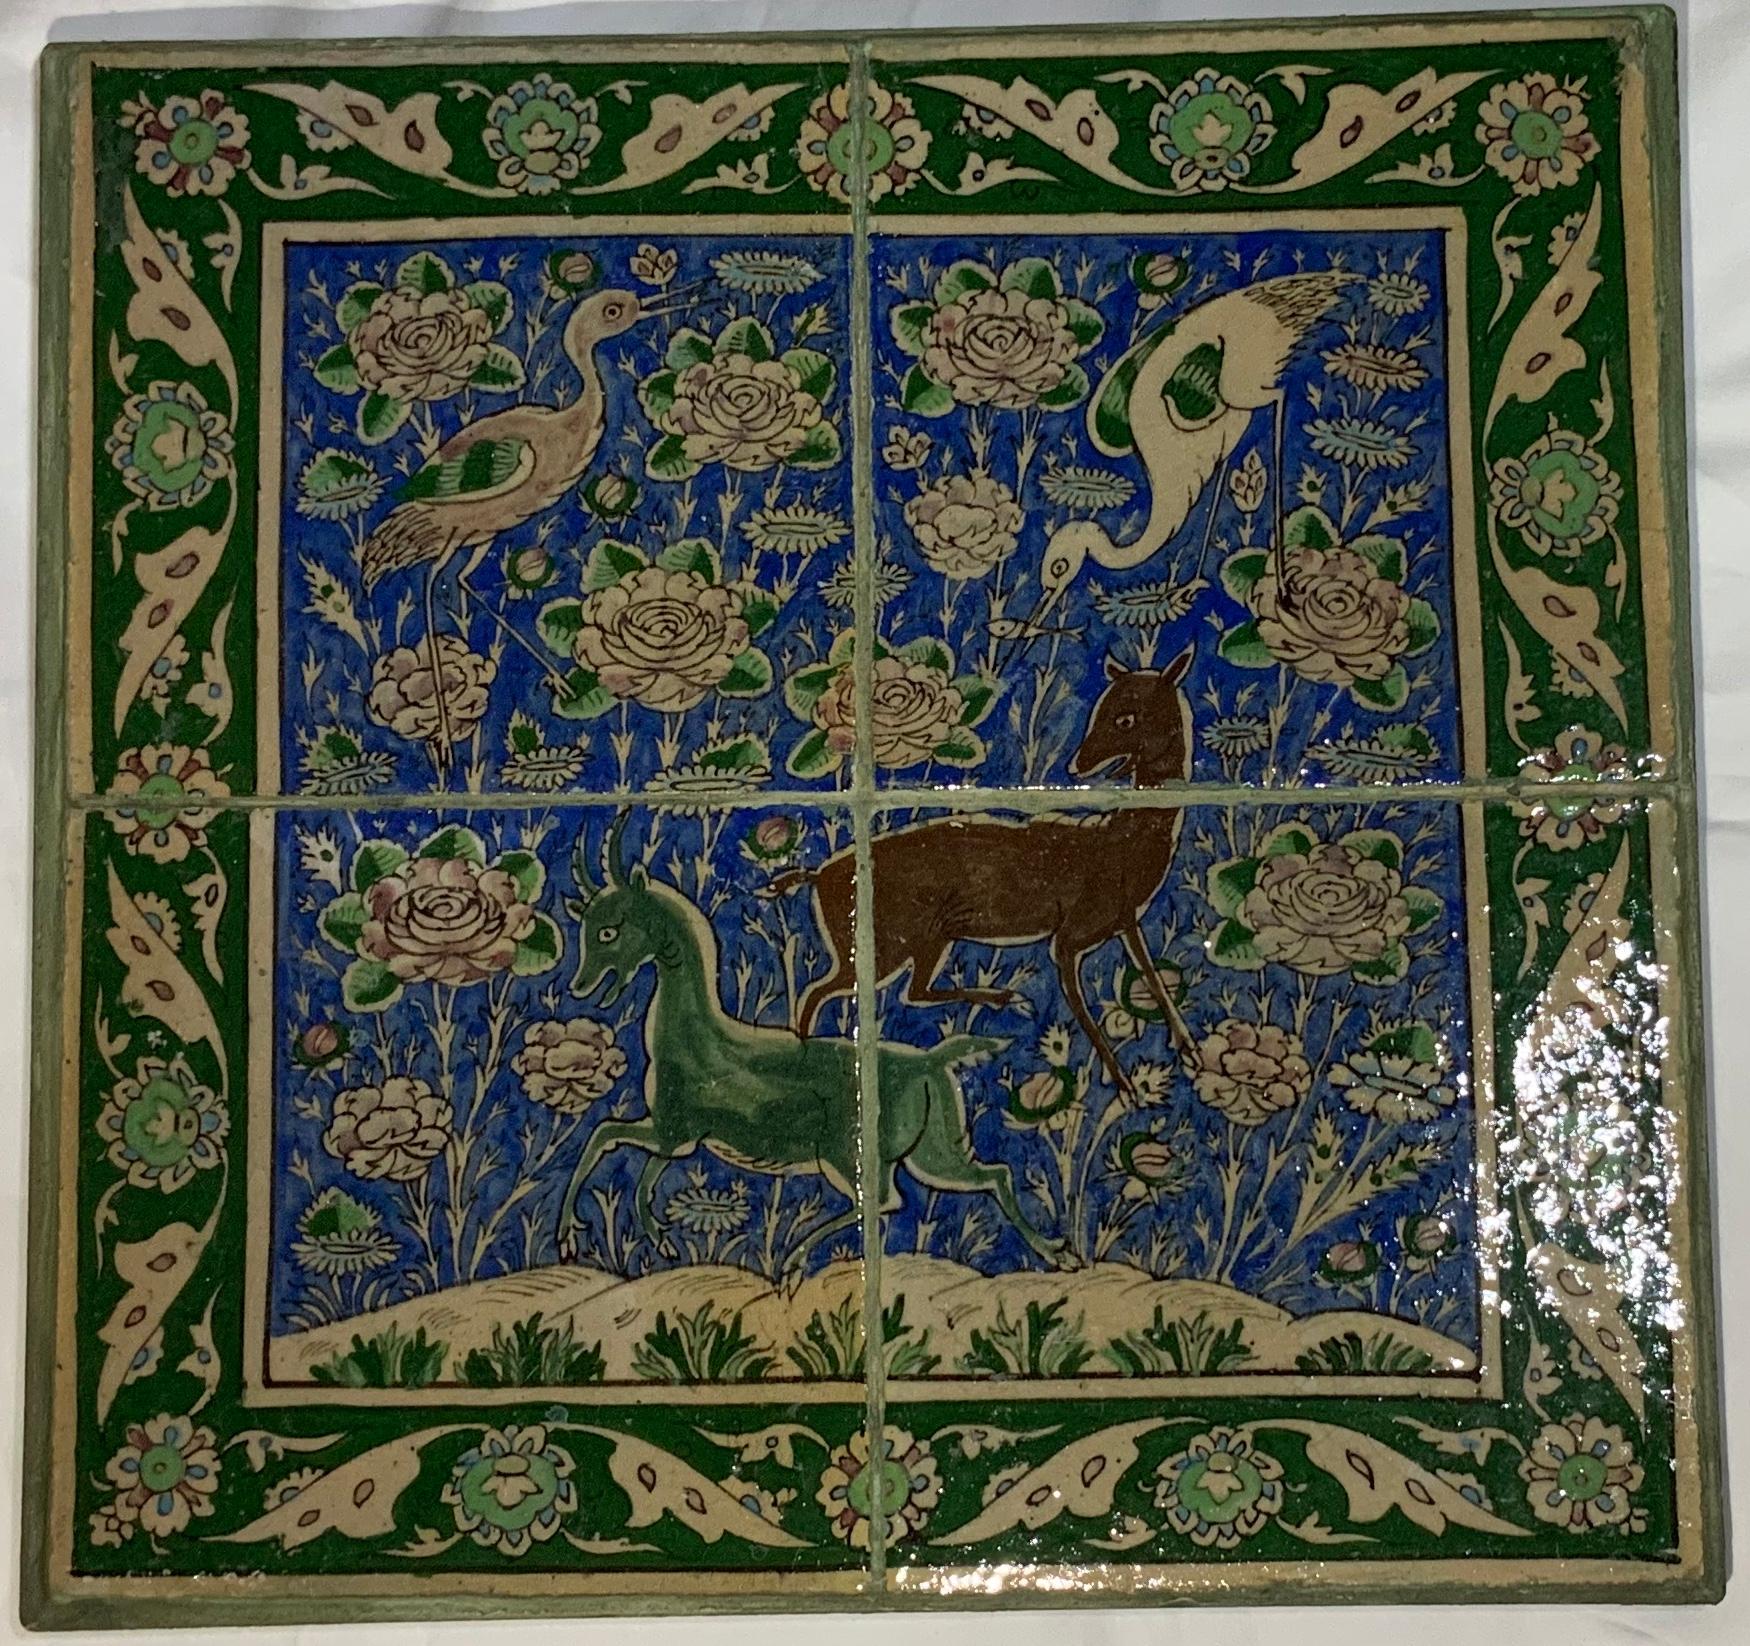 Beautiful set of nine tiles made of hand painted and glazed ceramic, embedded in professionally custom made steel frame. The tiles are hand painted with birds and animals motifs and floral and vine in the background. Exceptional green border. One of